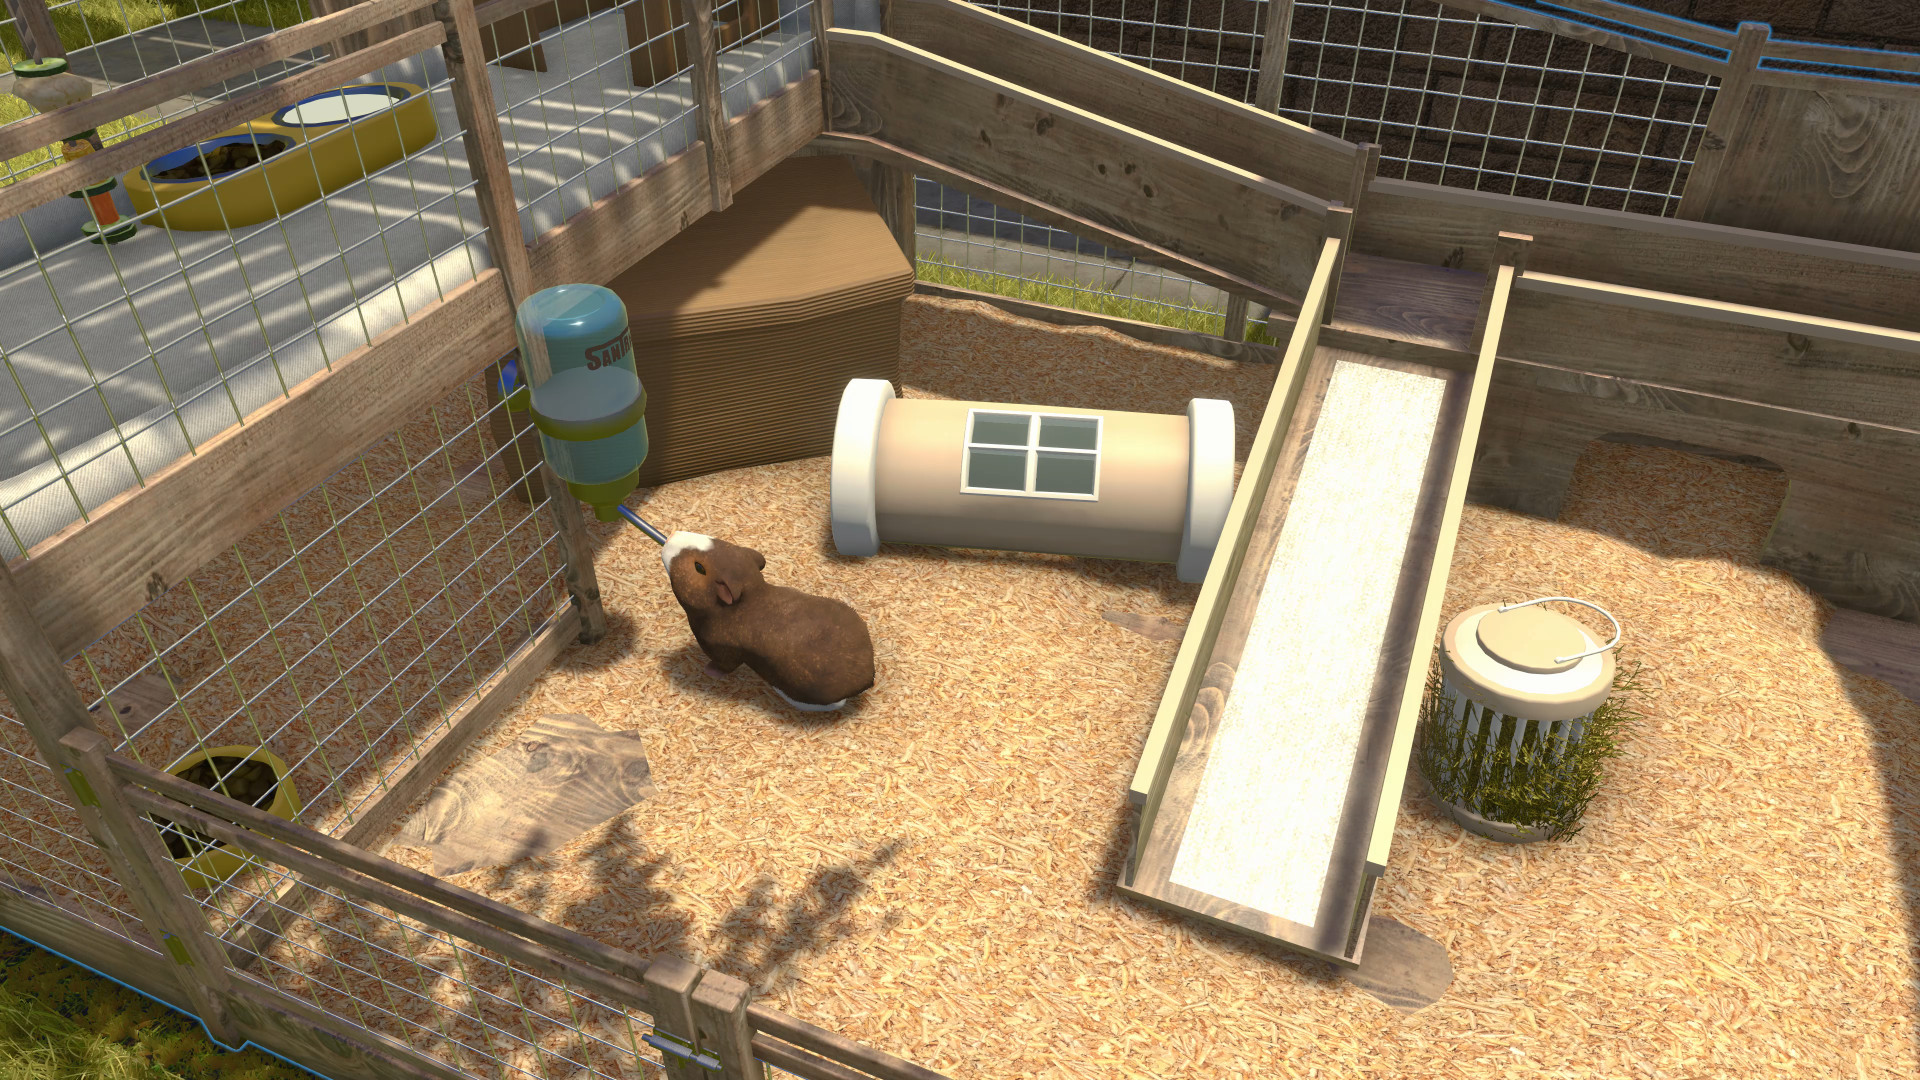 Save 35% on House Flipper - Pets DLC on Steam